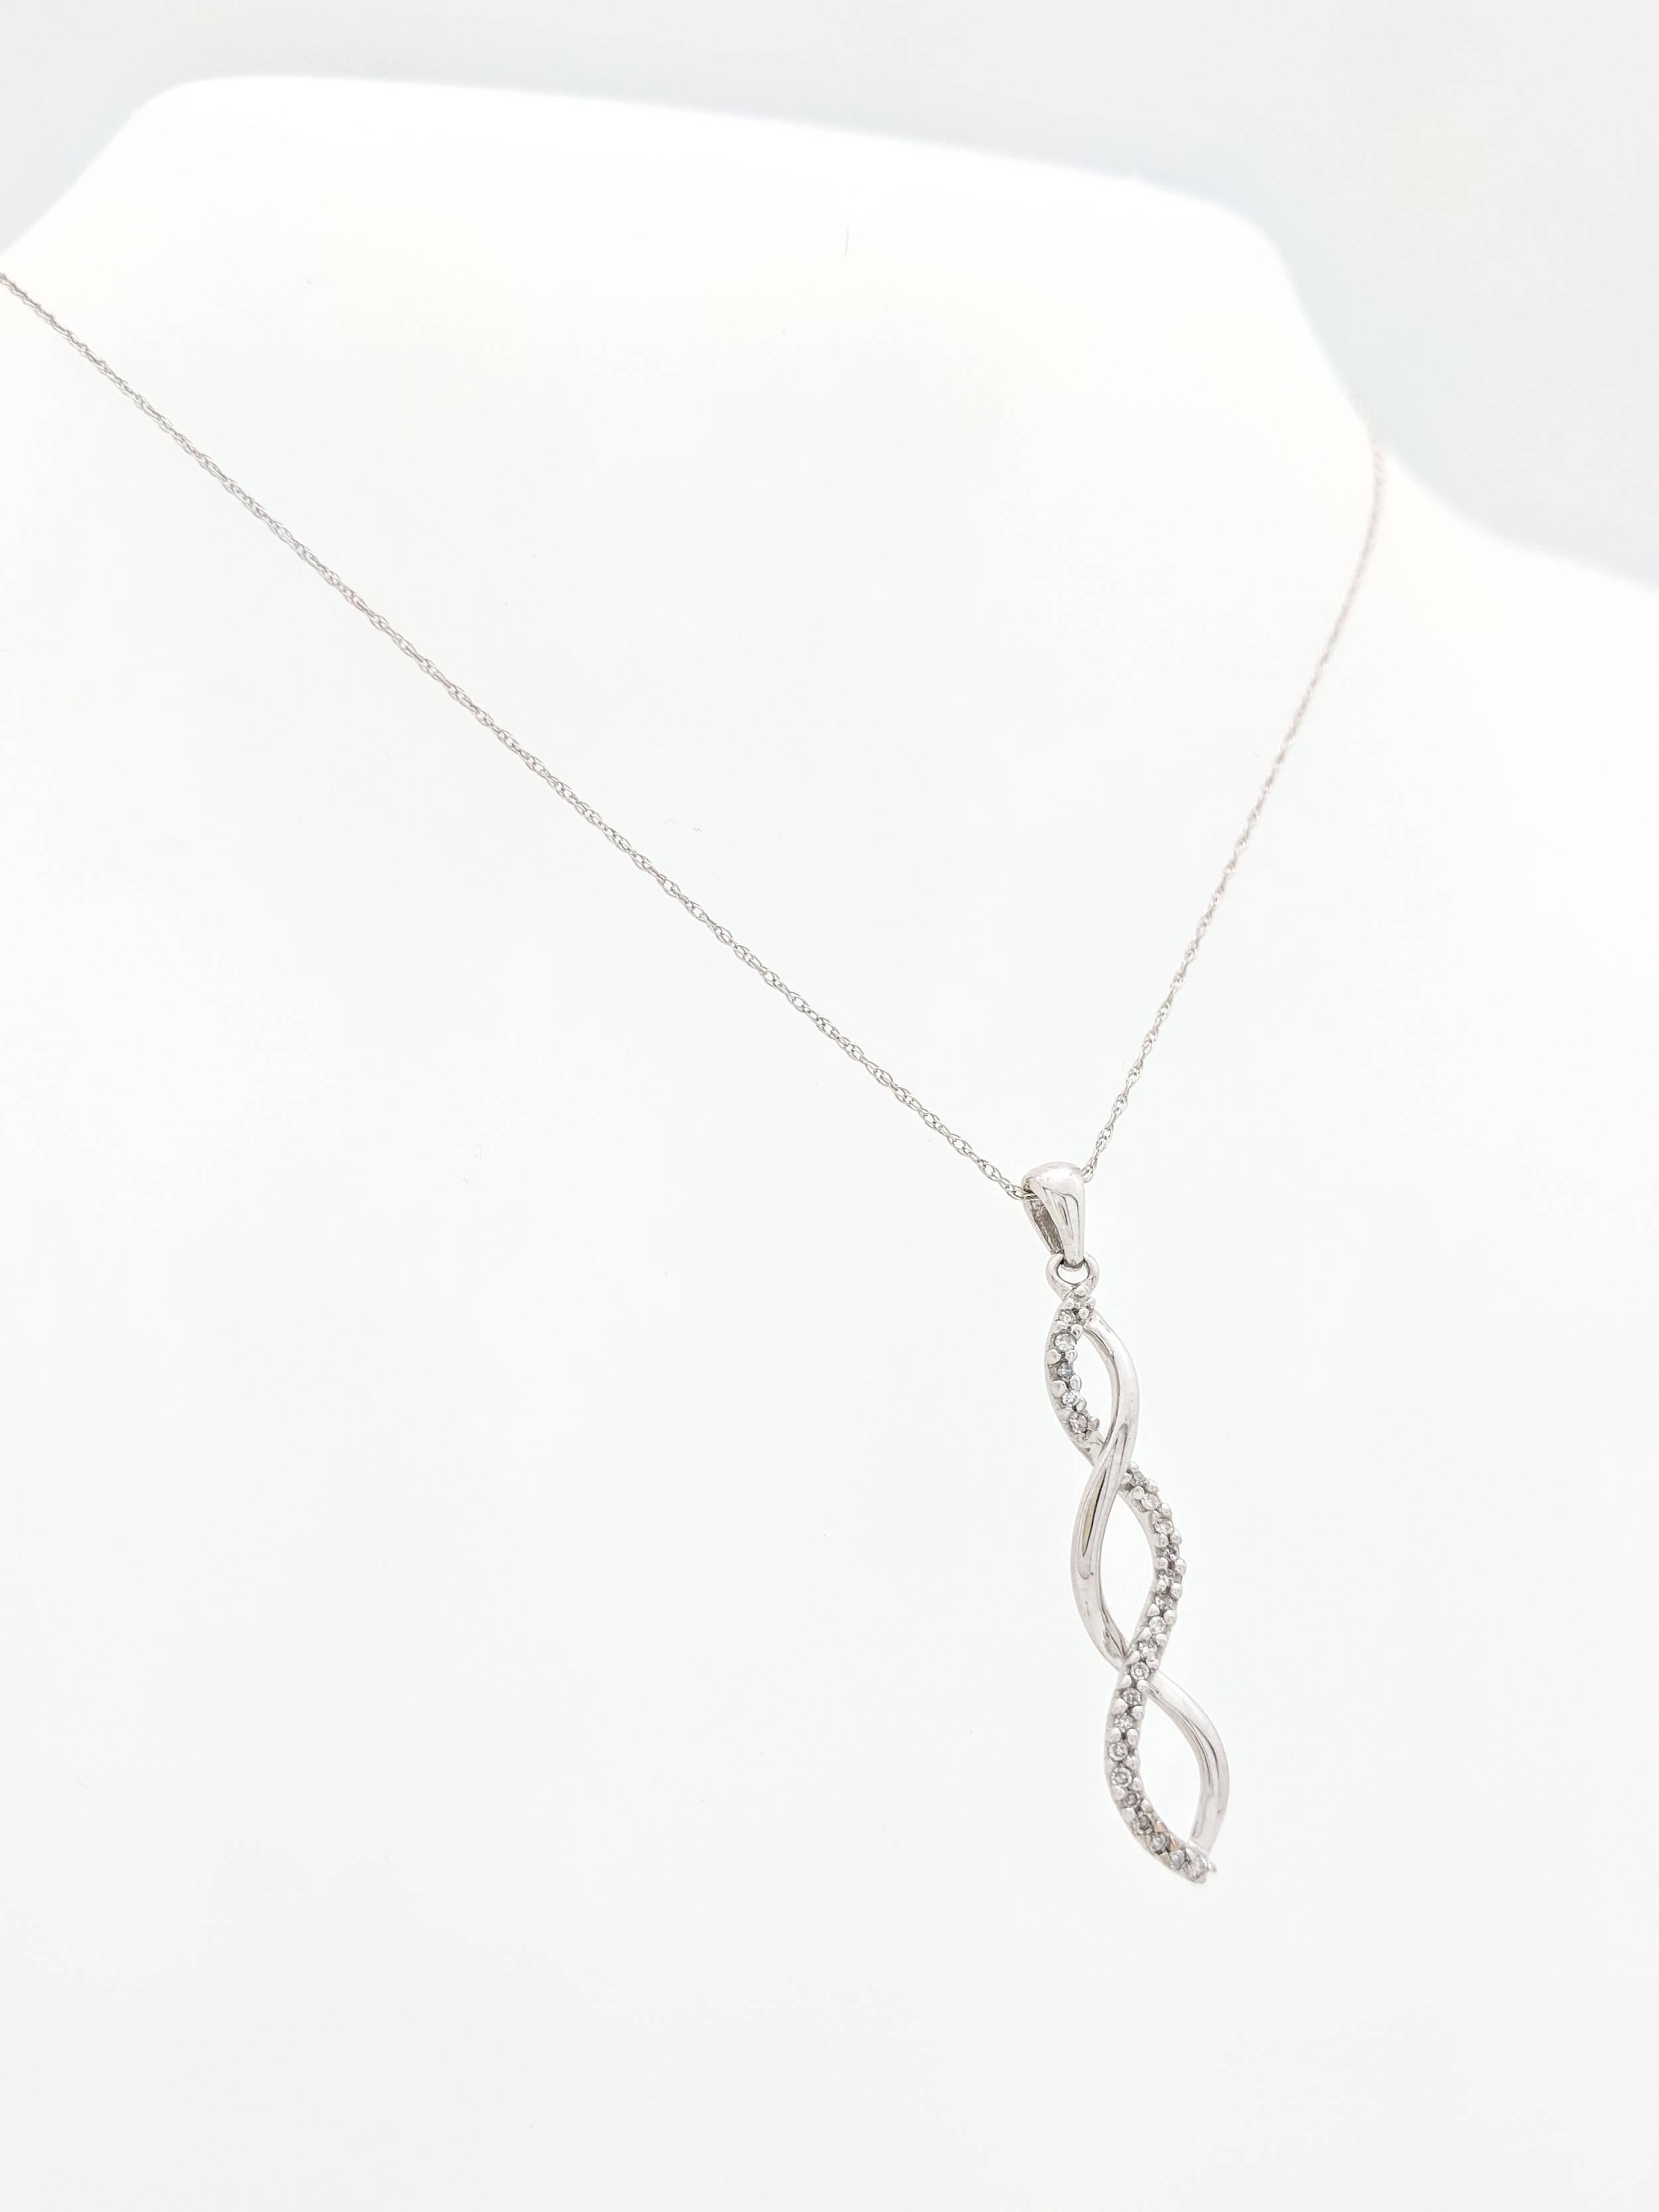 10k White Gold .25ctw Diamond Swirl Pendant Necklace 1.8 Grams

You are viewing a beautiful diamond swirl pendant necklace. This pendant necklace is crafted from 10k white gold and and weighs 1.8 grams. The pendant measures 1.5